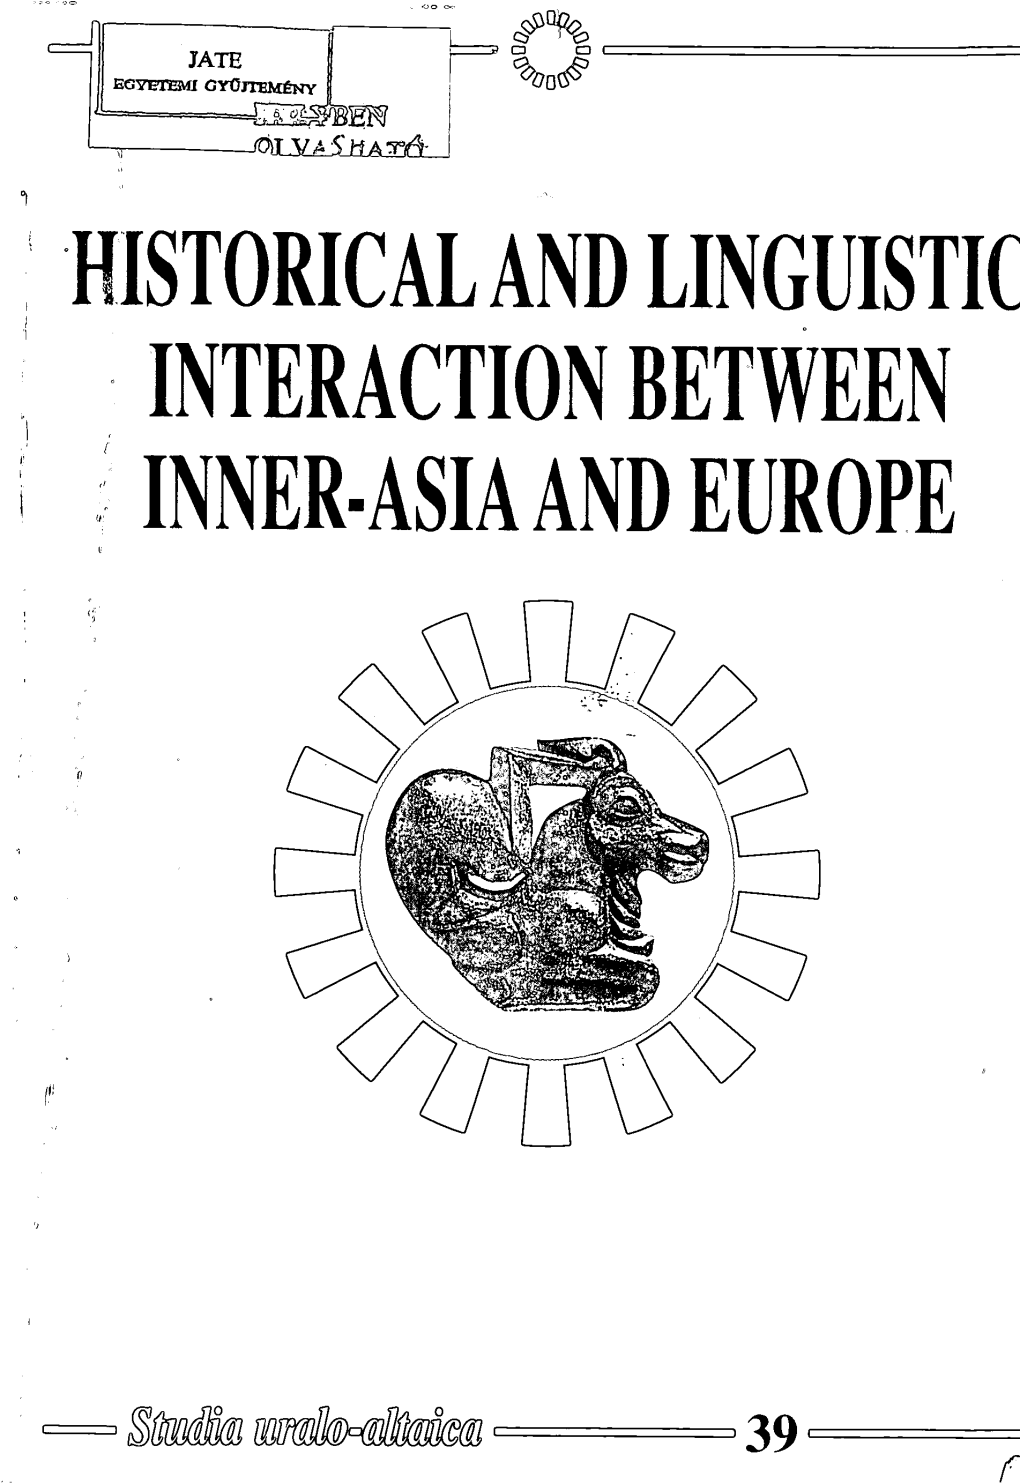 Historical and Linguistic Interaction Between Inner-Asia and Europe